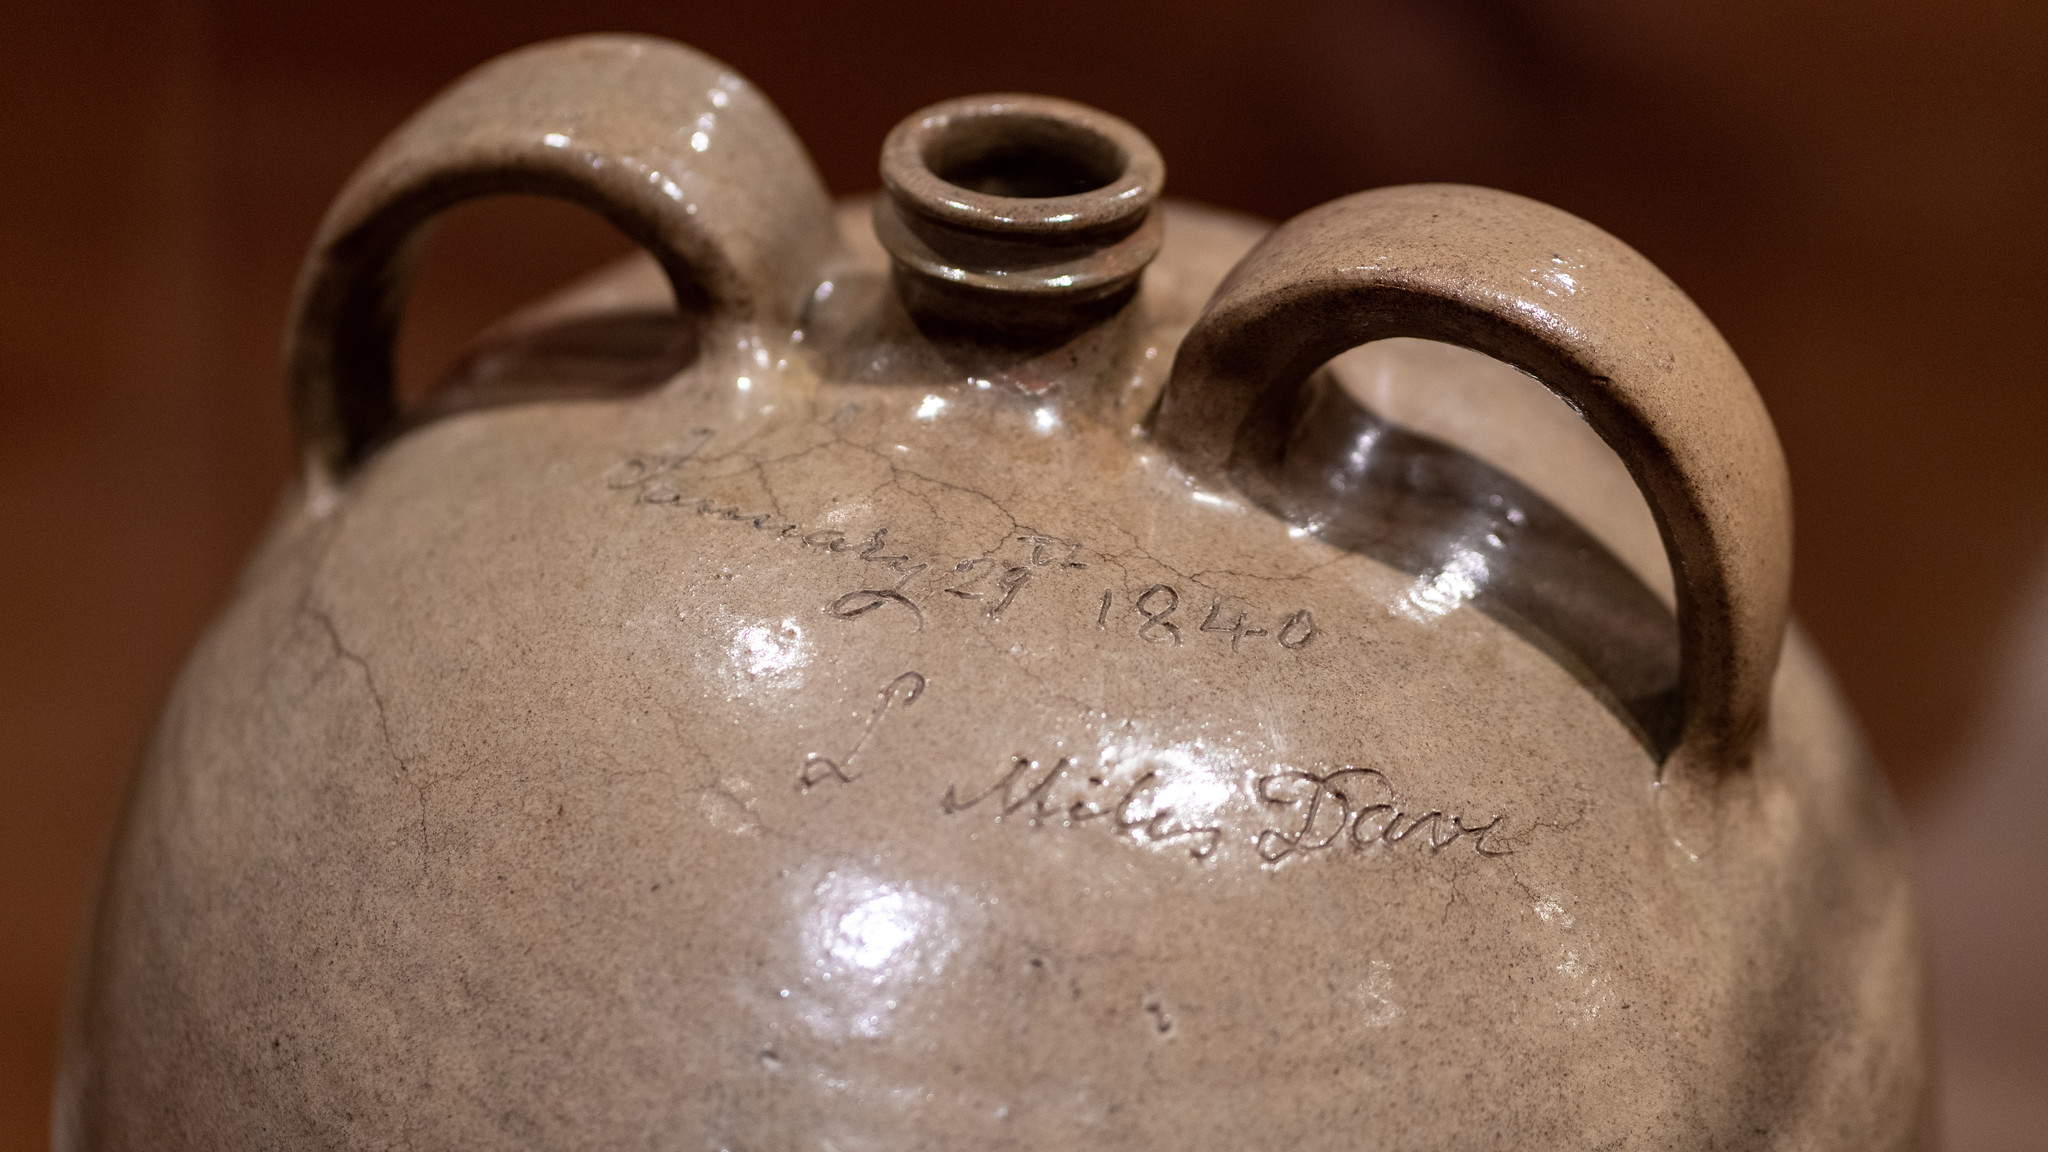 Names and date (detail), David Drake, Doubled-handled Jug (Lewis J. Miles Factory, Horse Creek Valley, Edgefield District, South Carolina), 1840, stoneware with alkaline glaze, 44.13 x 35.24 cm (Virginia Museum of Fine Arts; photo: Steven Zucker, CC BY-NC-SA 2.0)